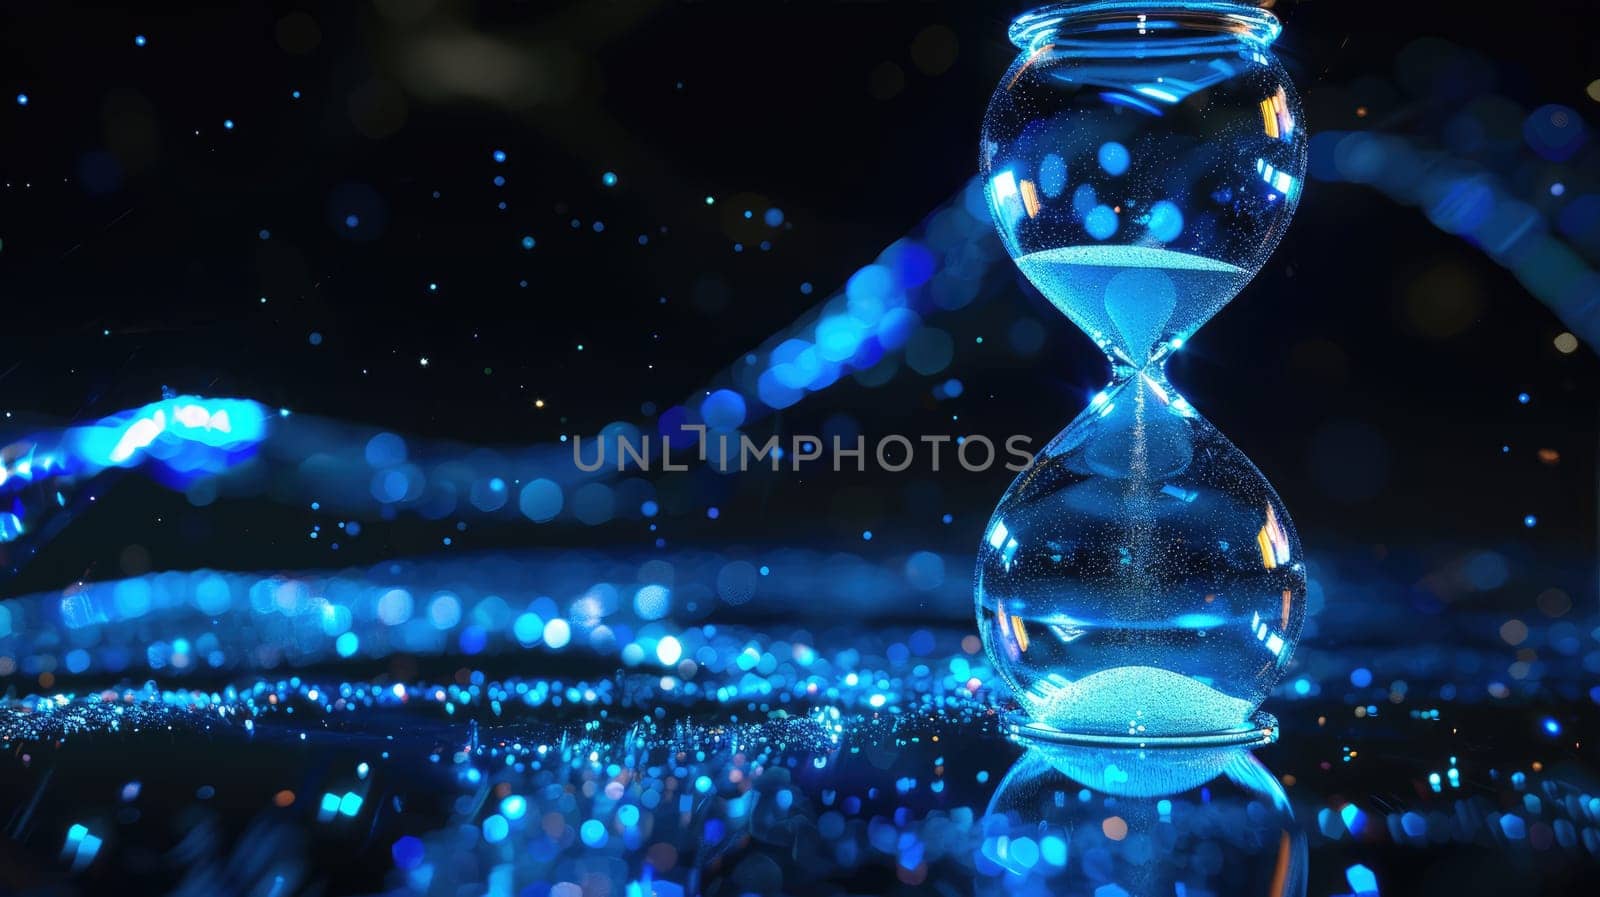 Hourglass of time for managing time and space. Magical glow effect by natali_brill